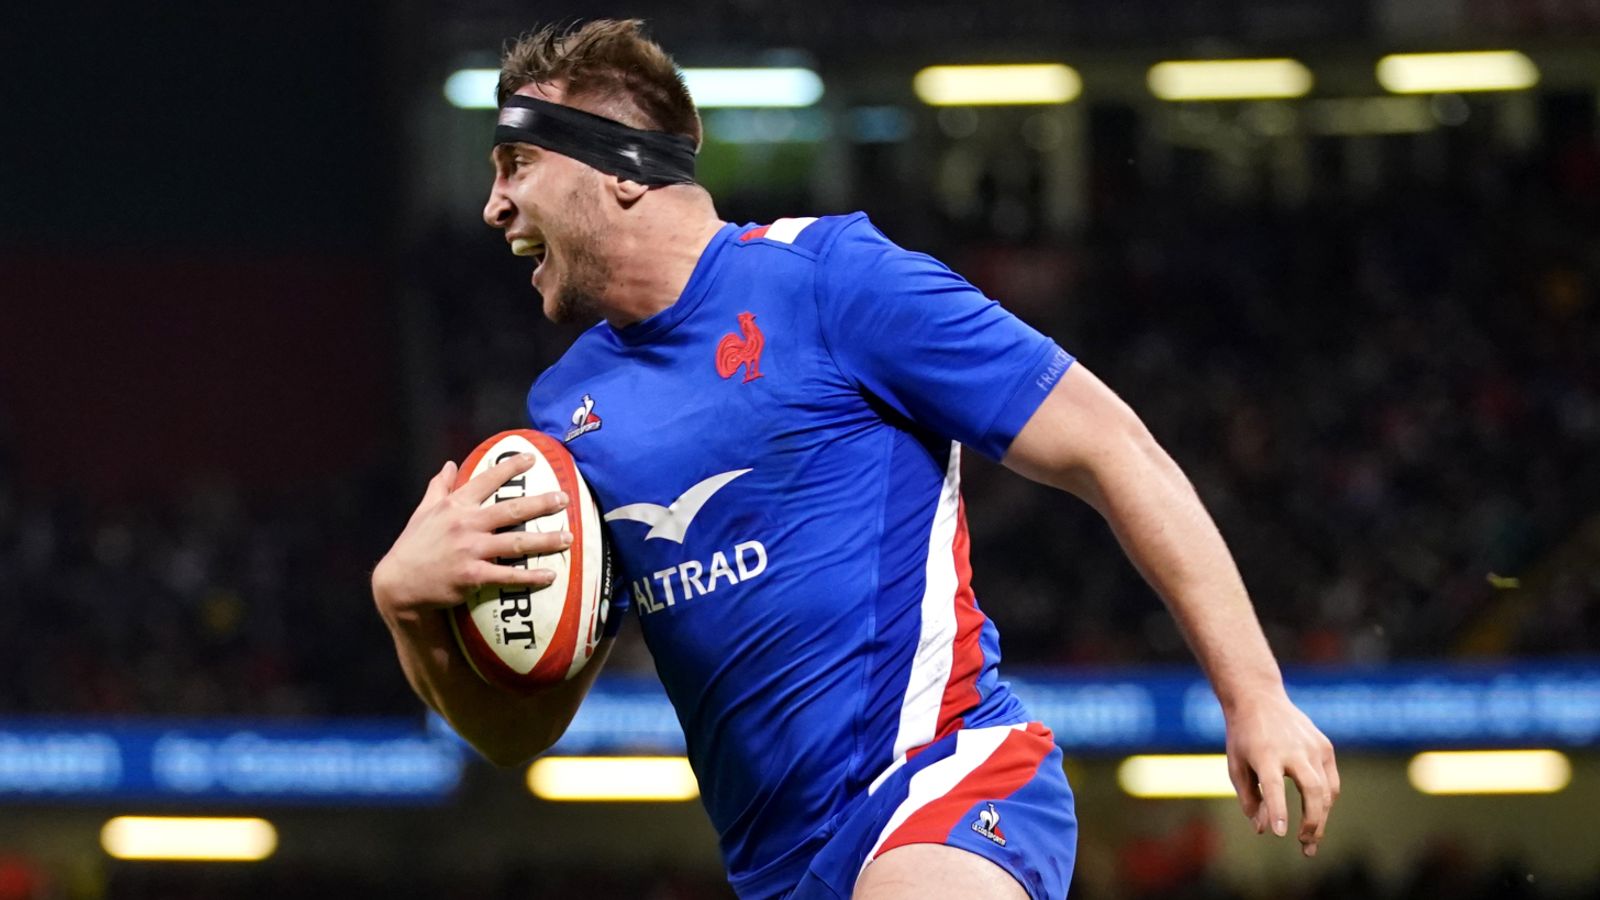 Wales 9-13 France: Les Bleus remain on track for Six Nations Grand Slam with win over spirited hosts in Cardiff